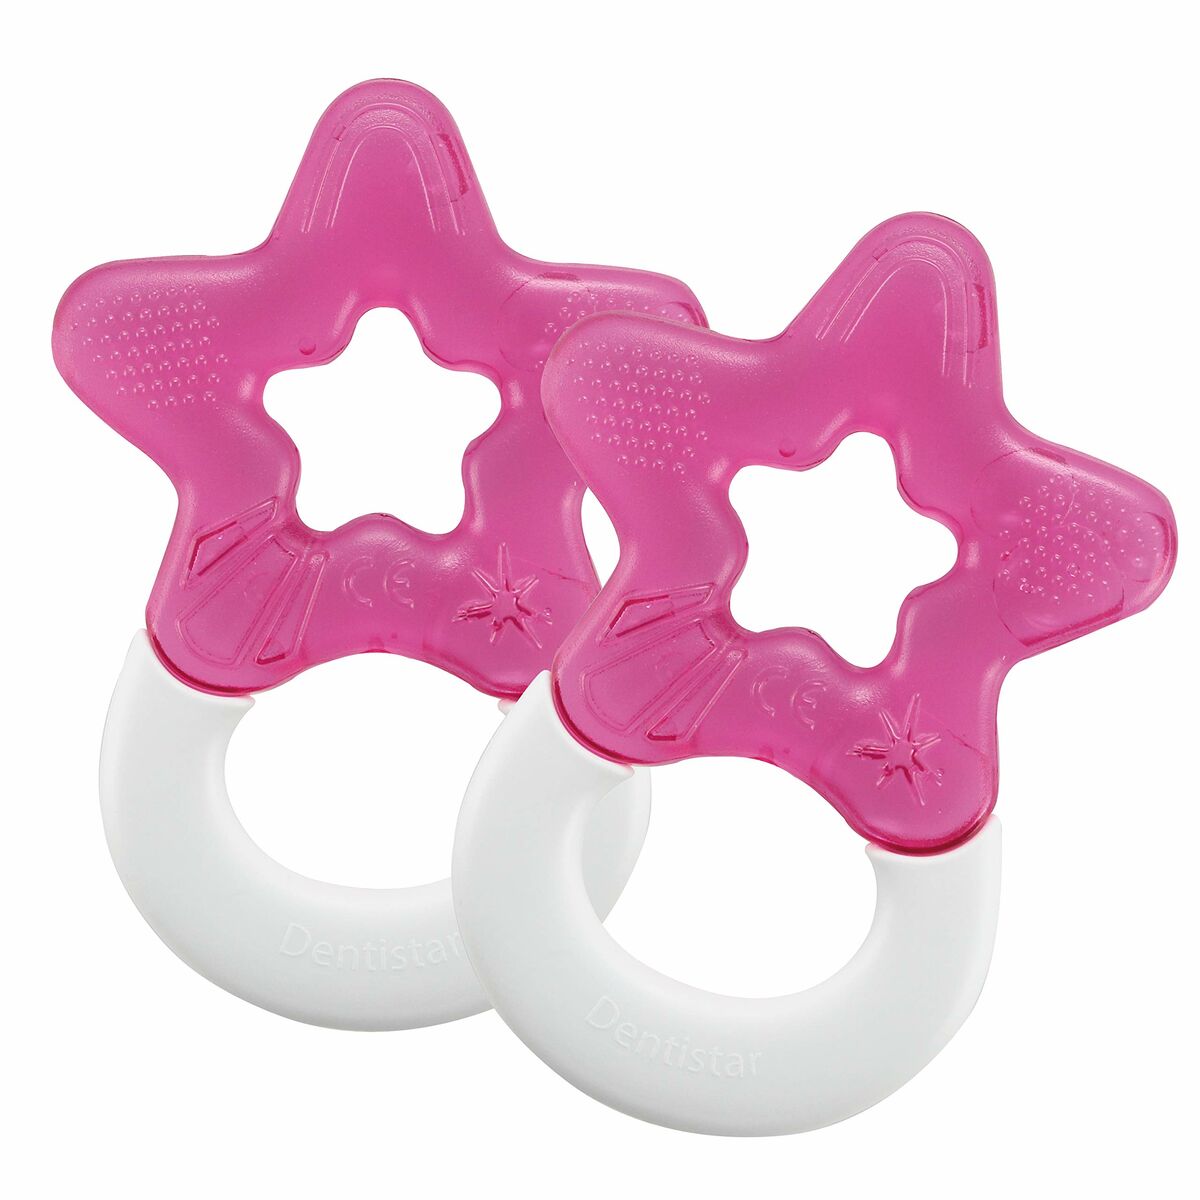 Teether + 3 Months 2 Units (Refurbished A+) - Little Baby Shop